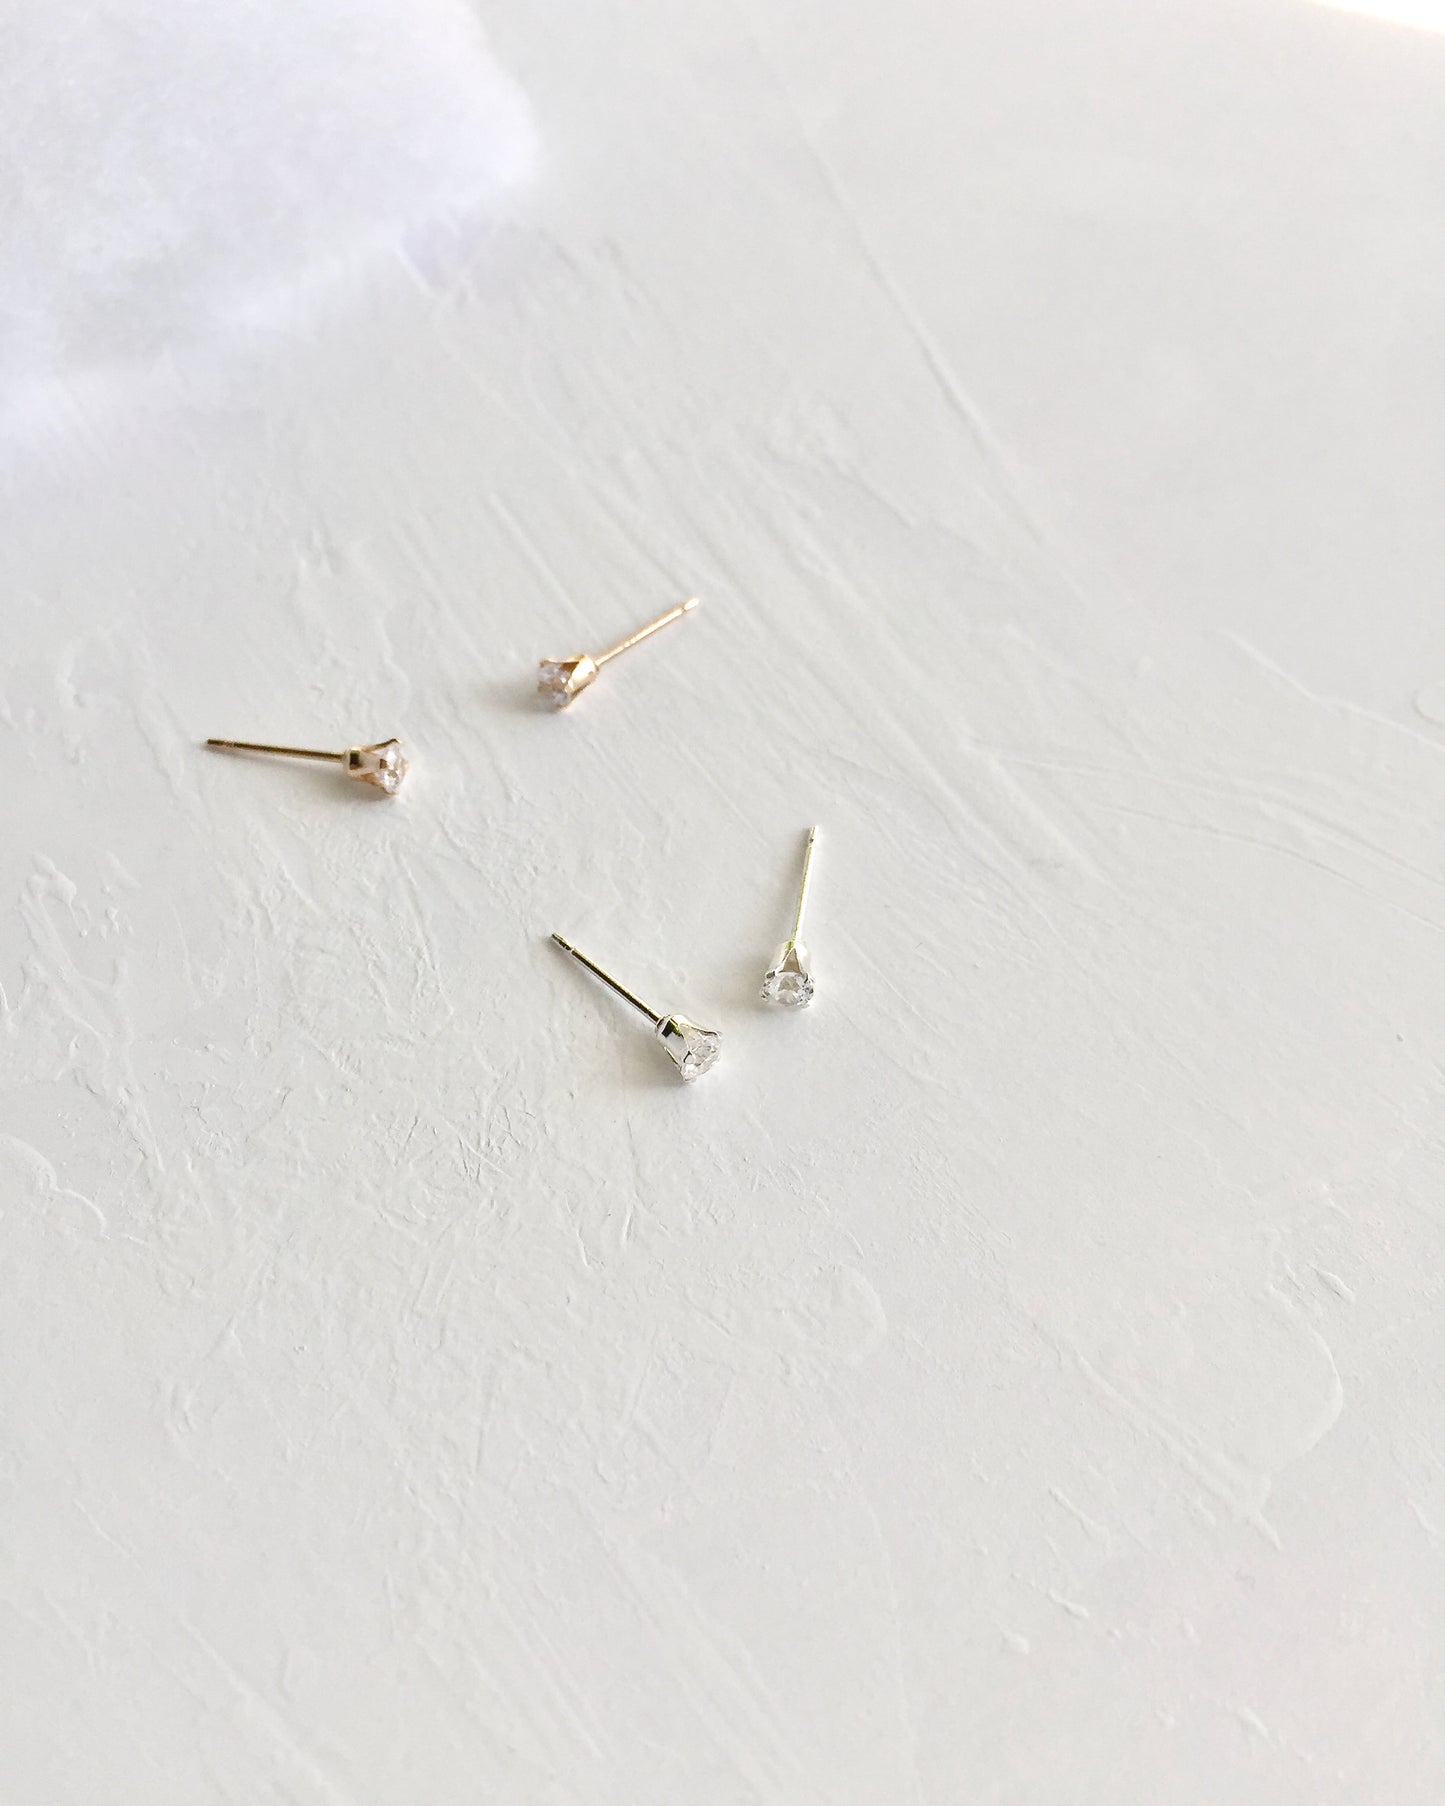 Tiny CZ Stud Earrings | Delicate Stud Earrings In Gold Filled or Sterling Silver | IB Jewelry